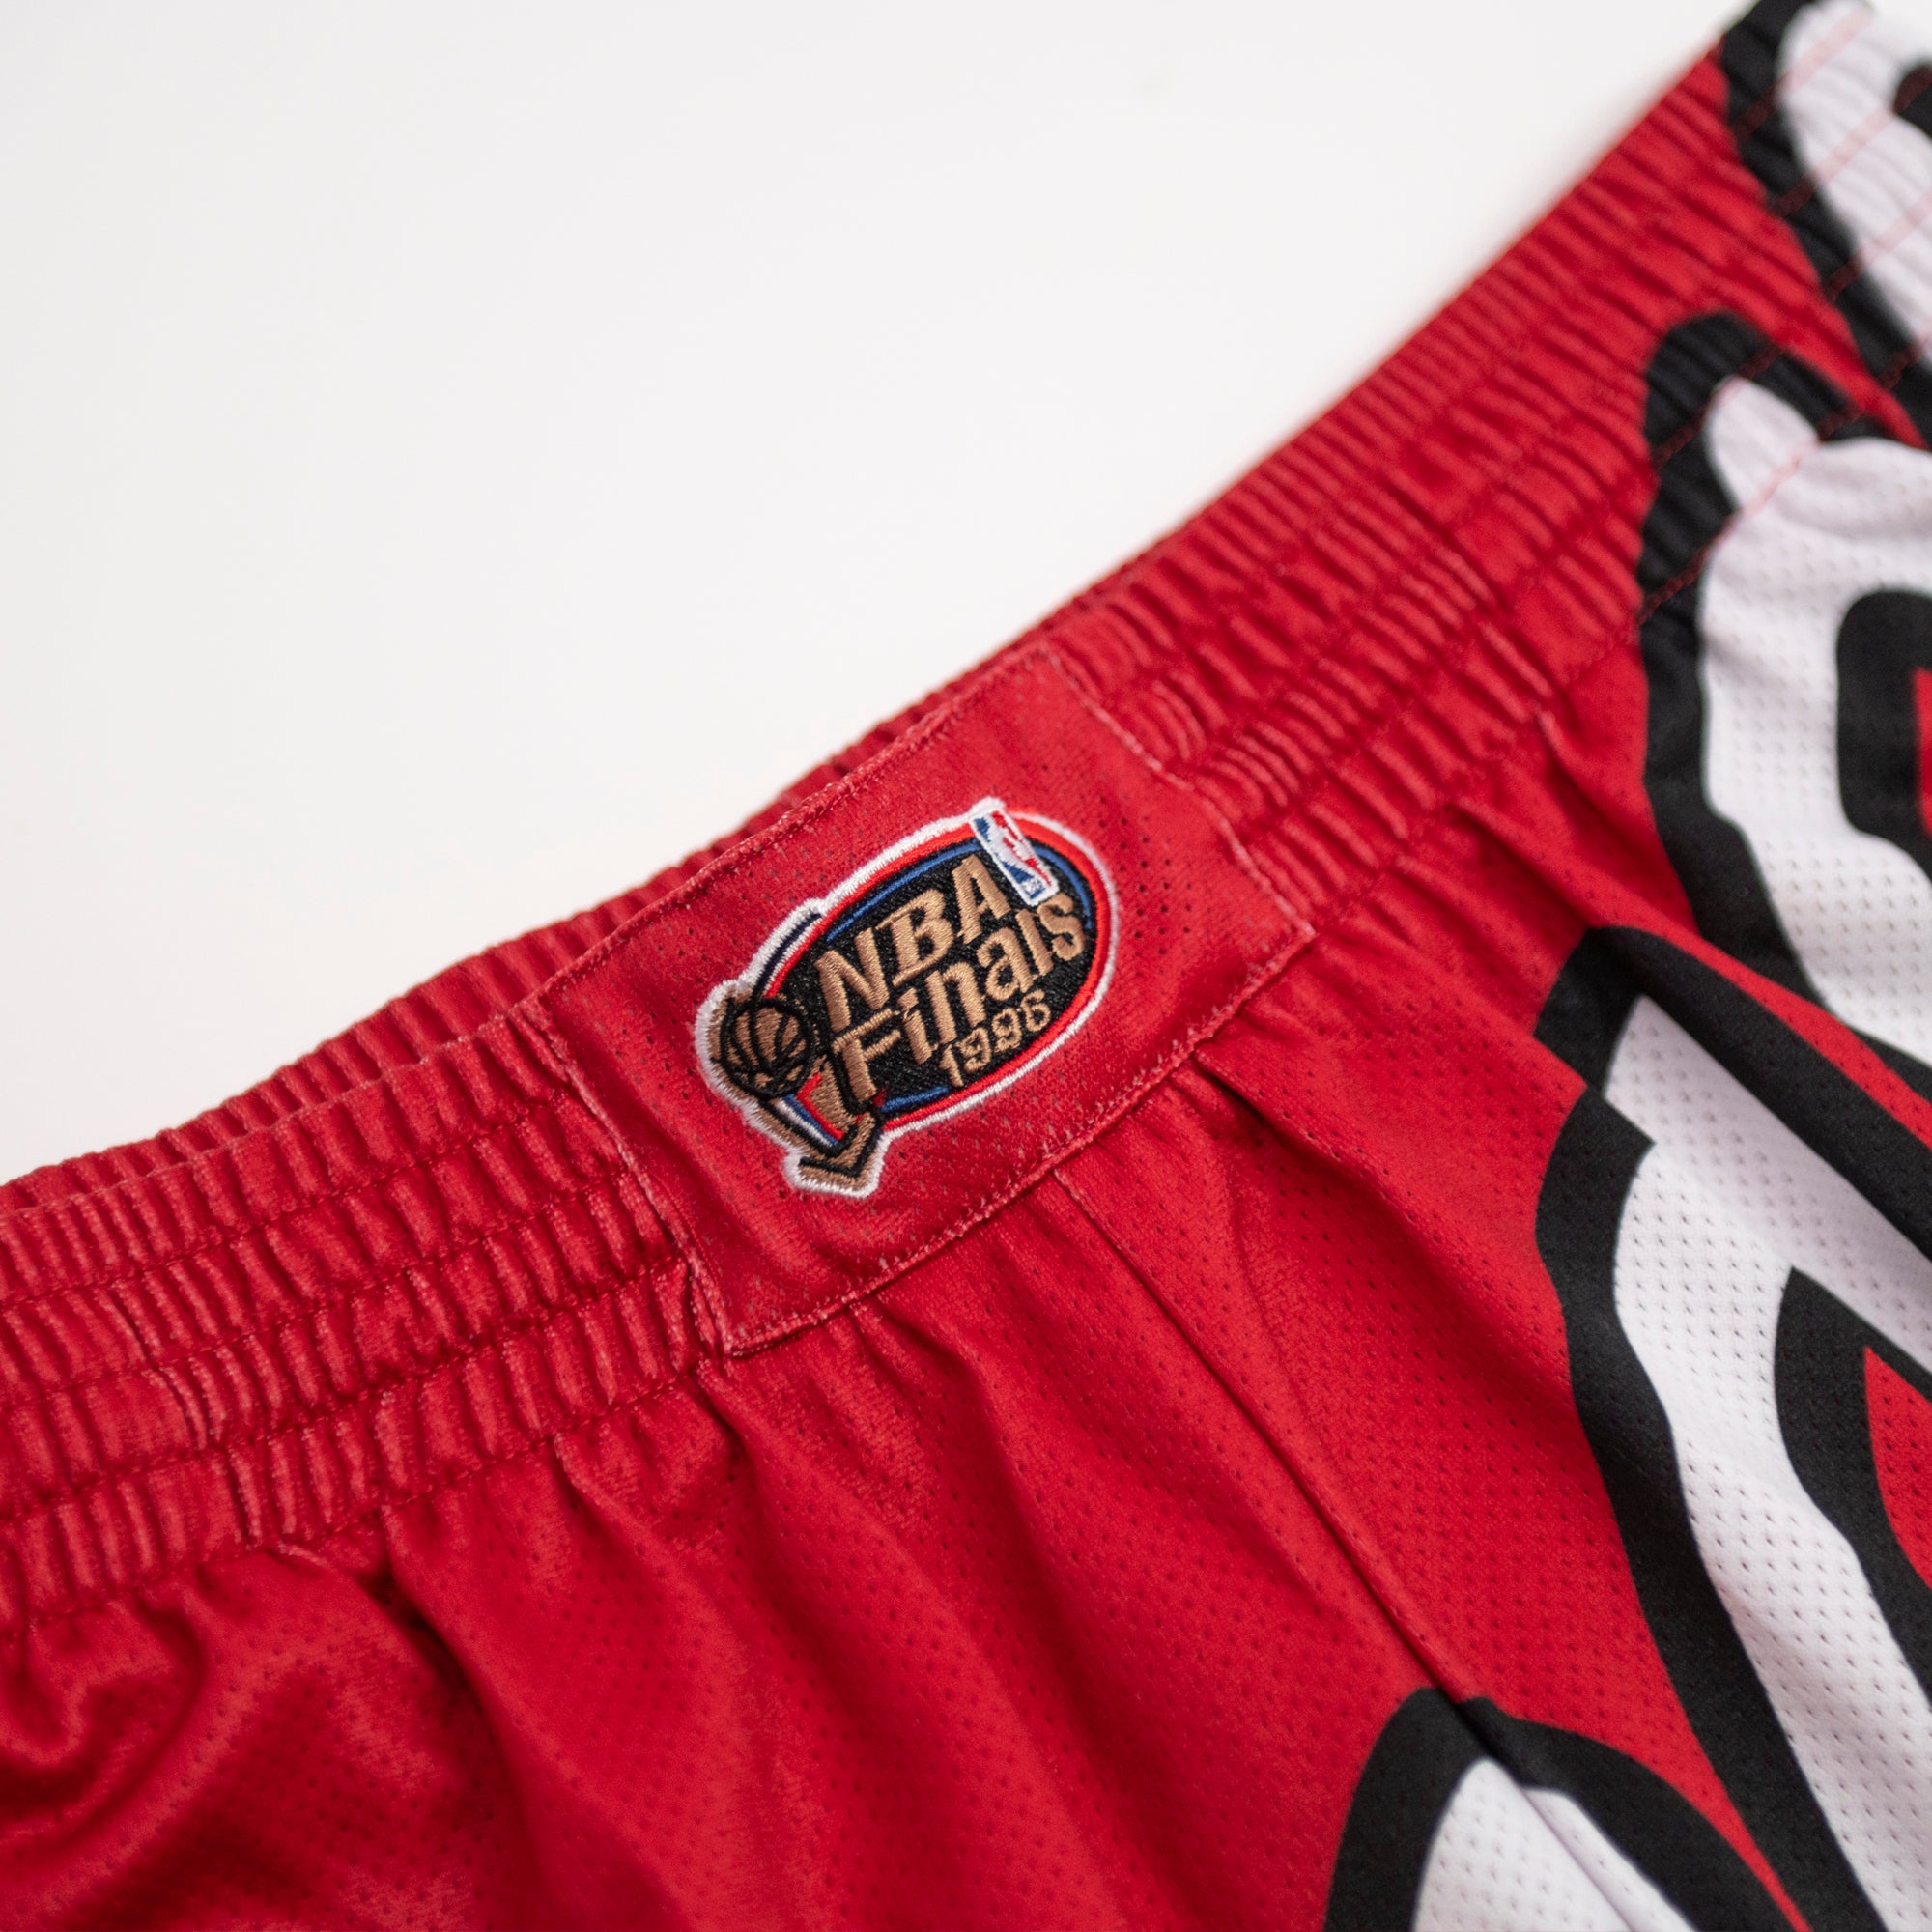 Mitchell & Ness Chicago Bulls Authentic Basketball Short in Black for Men